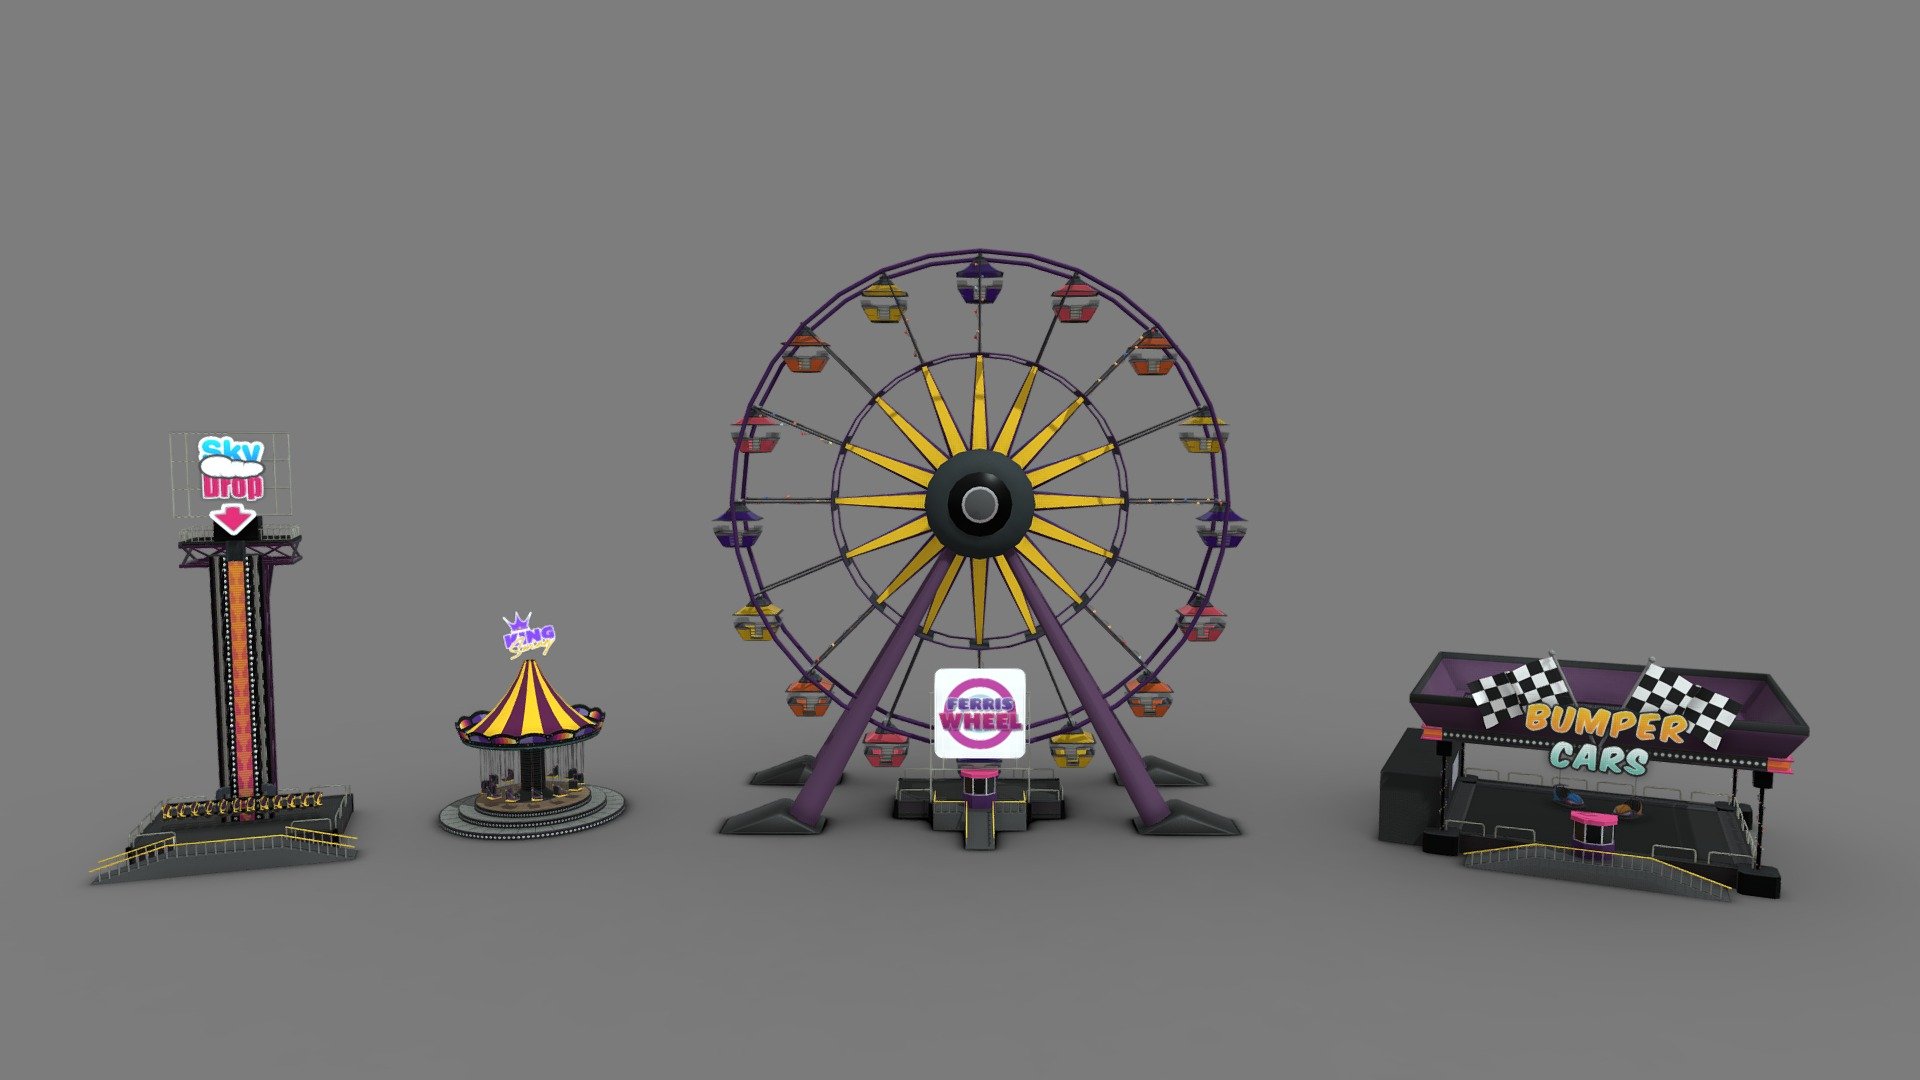 Pack of 4 different amusement park attractions including: ferris wheel, sky drop, flying wheels and bumper cars. – these models is part of our amusement par]k pack that you can fin in our profile 3d model